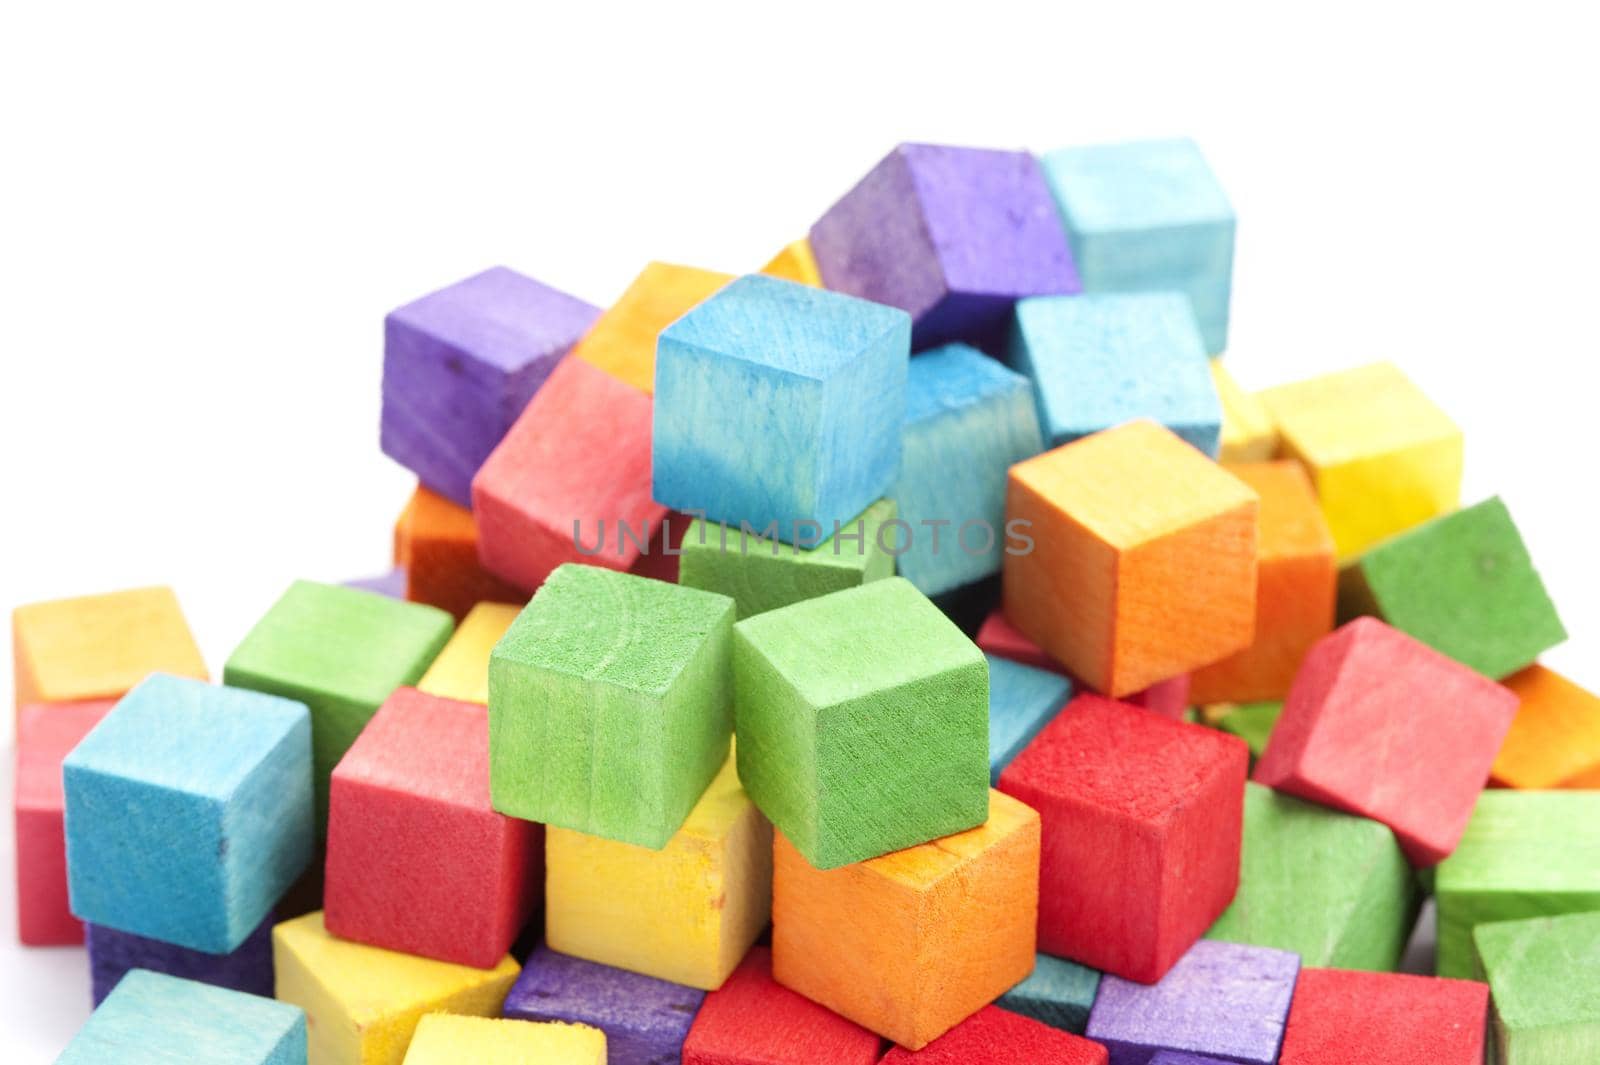 Jumbled Pile of Colorful Wooden Toy Blocks in Childhood Concept Image in Studio with White Background and Copy Space